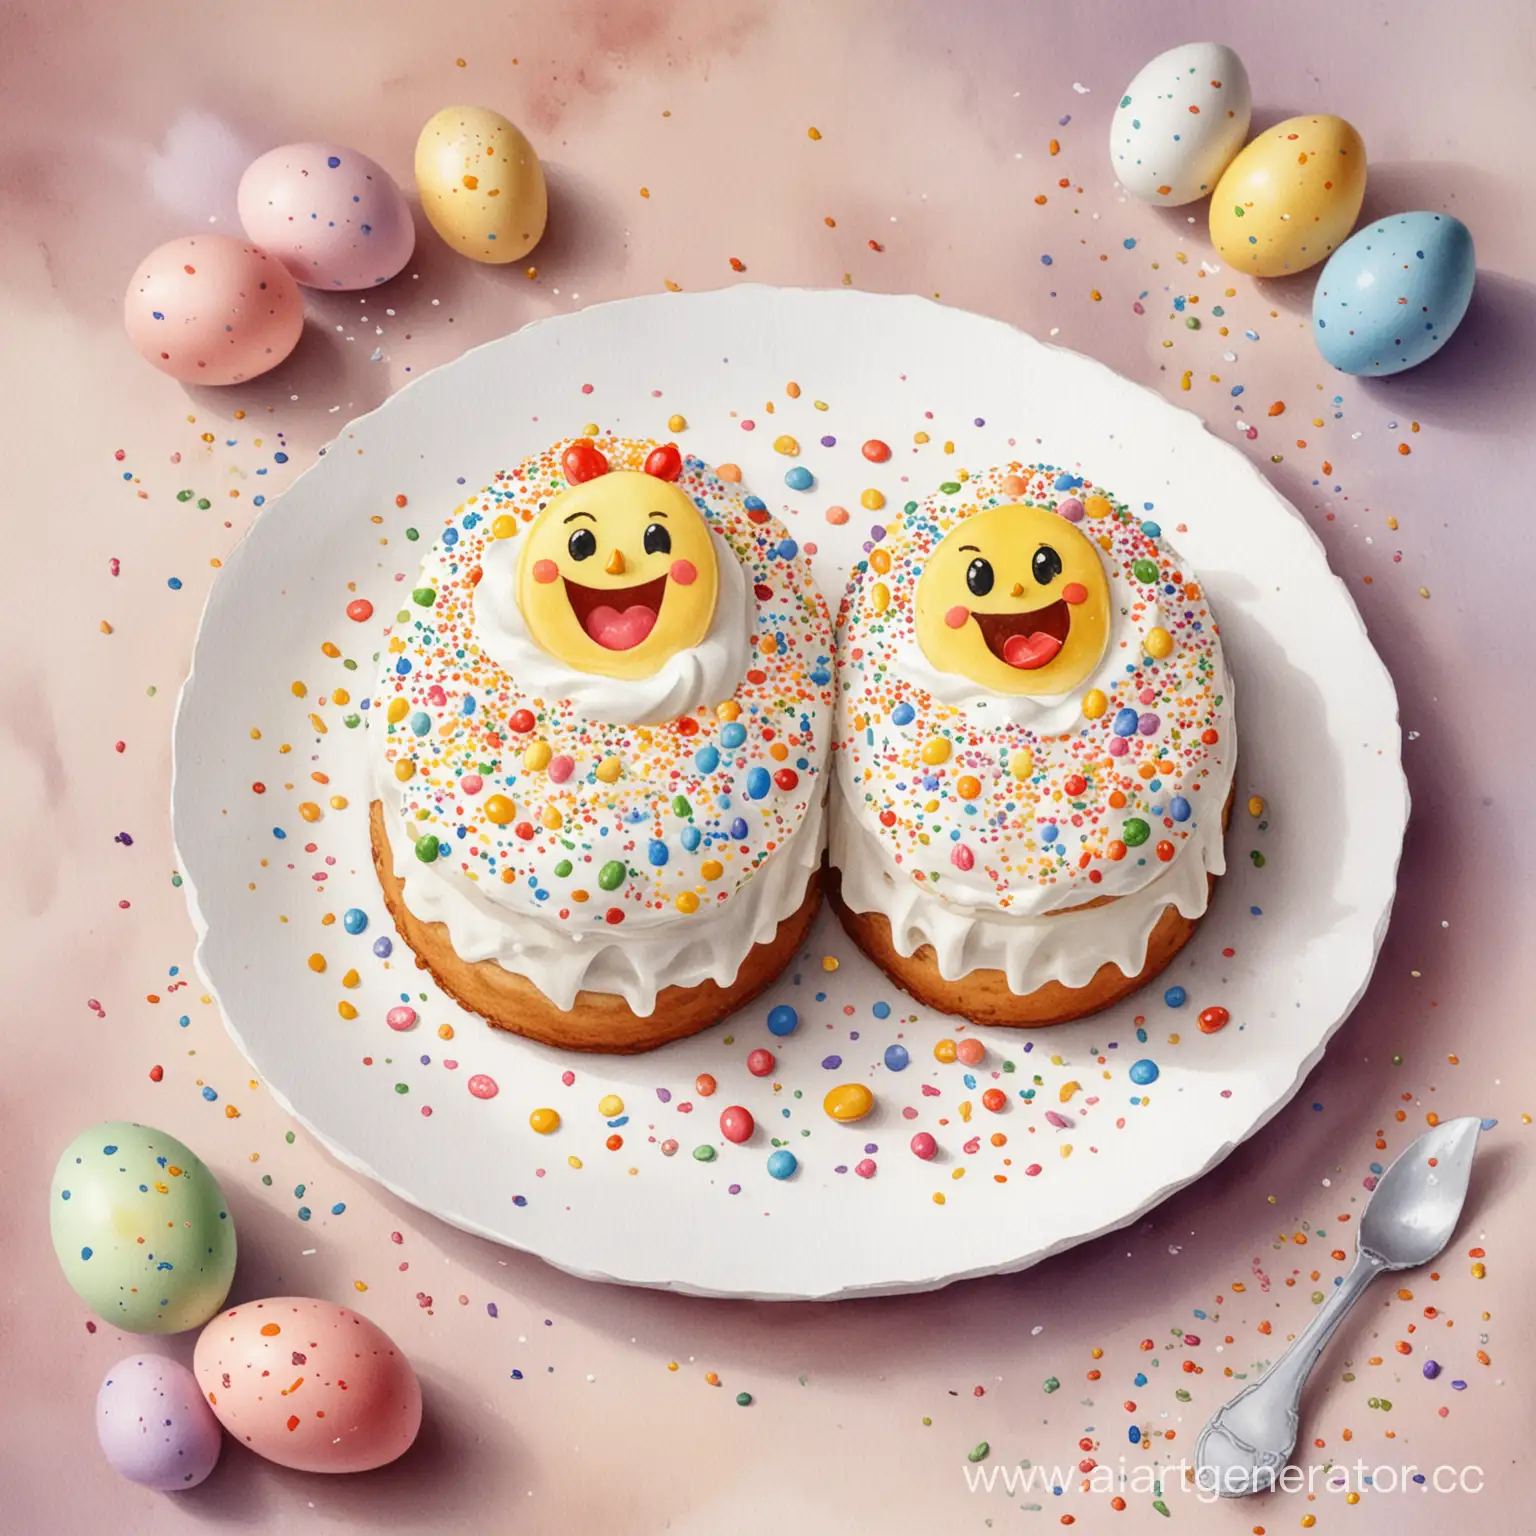 Colorful-Easter-Cakes-and-Smiley-Eggs-Watercolor-Painting